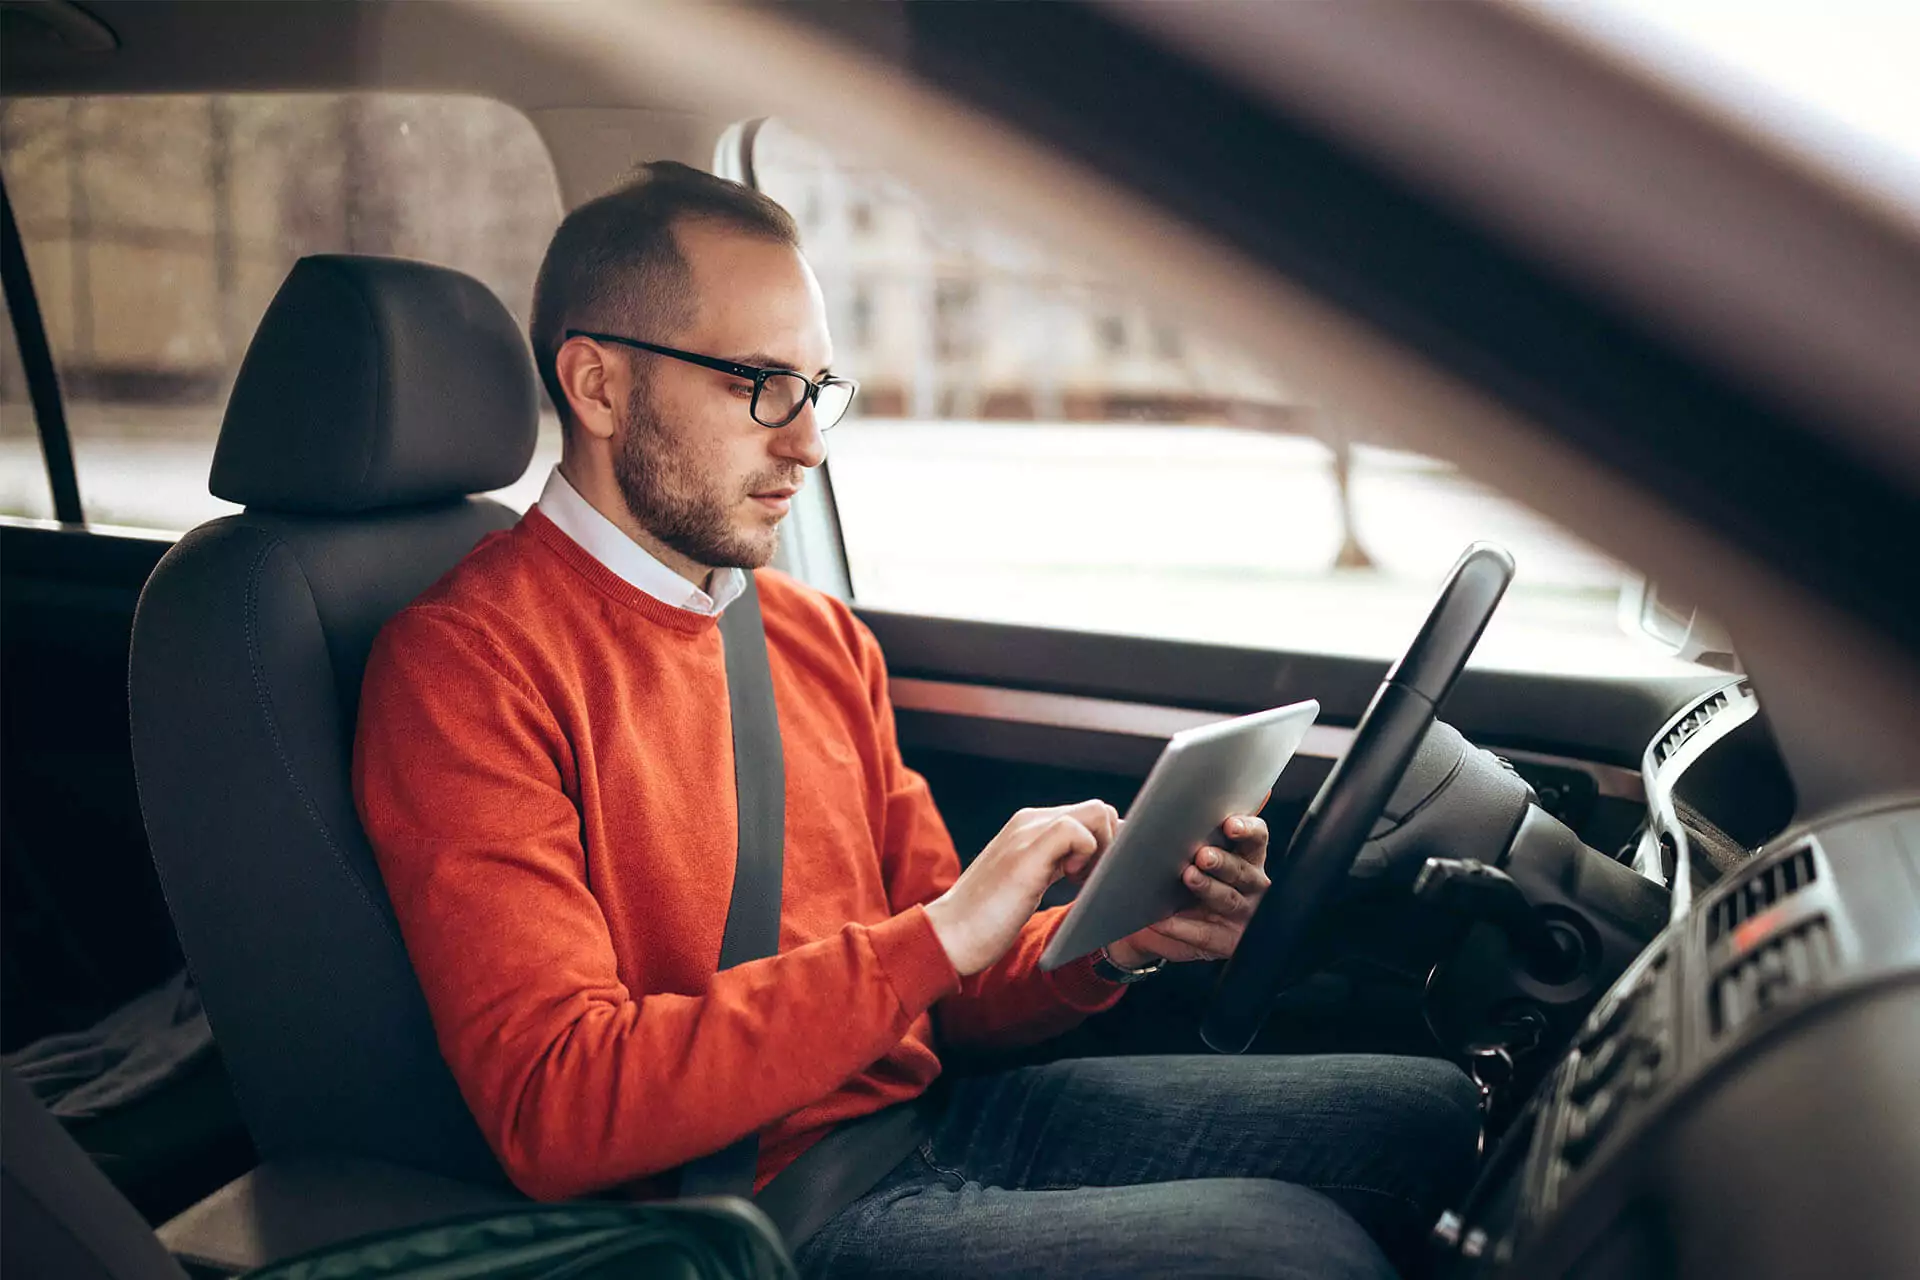 Man in orange sweater scrolling on a tablet in driver’s seat of a parked car